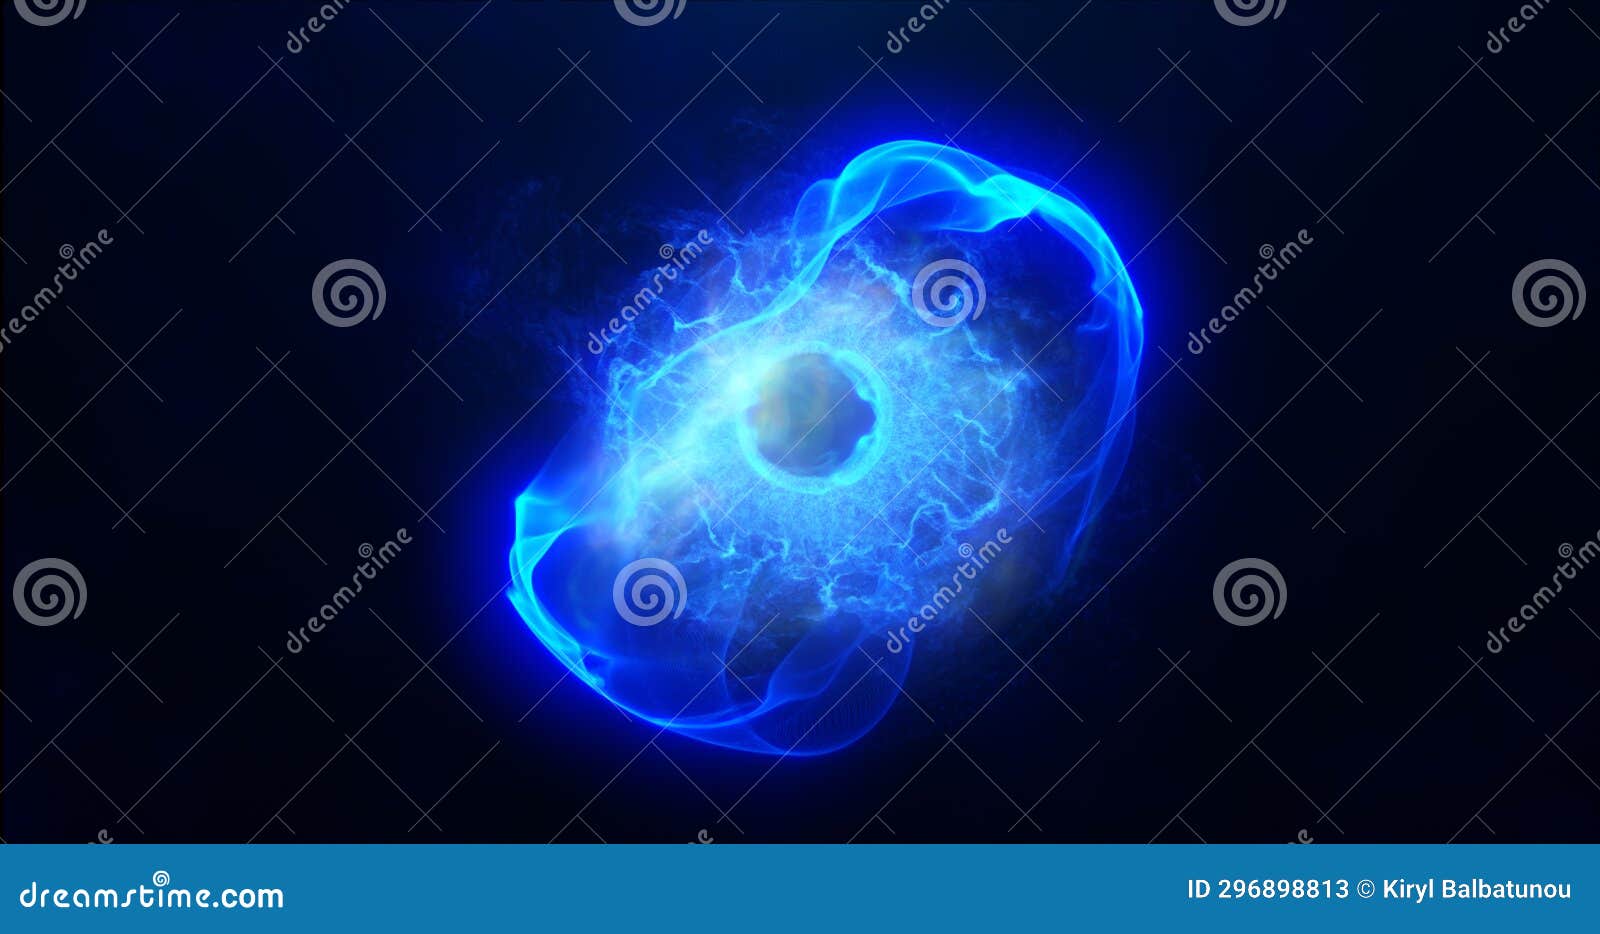 blue energy sphere with glowing bright particles, atom with electrons